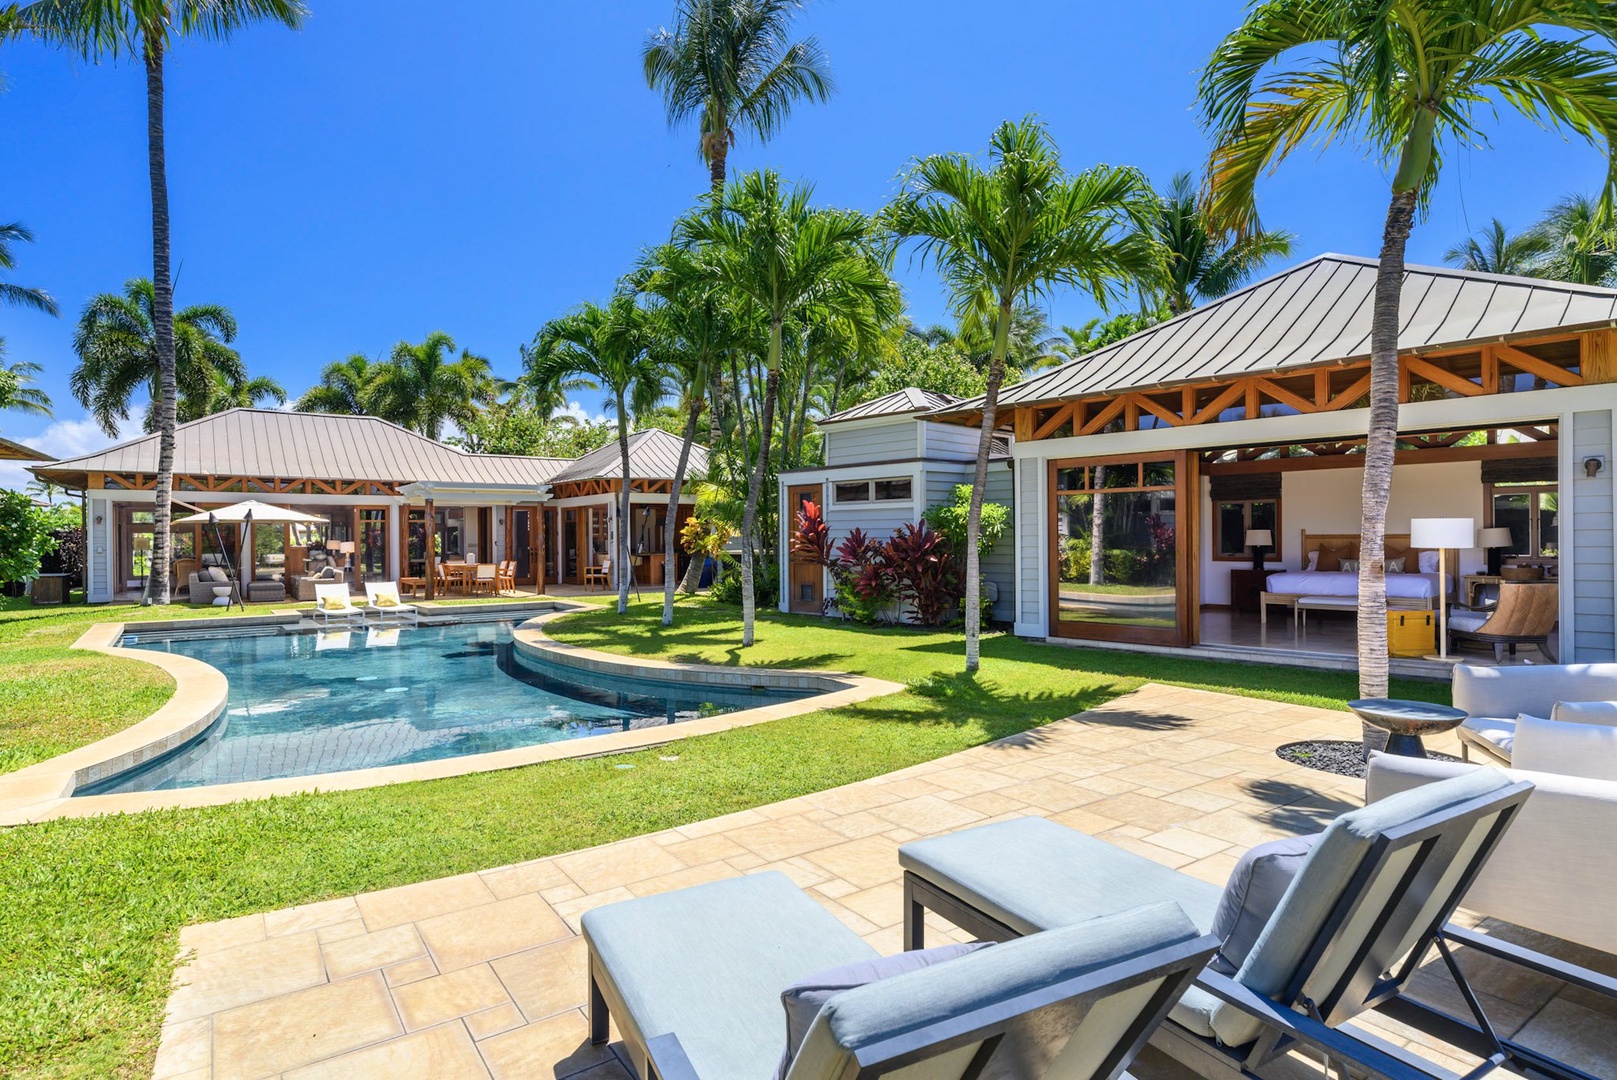 Kamuela Vacation Rentals, 3BD Na Hale 3 at Pauoa Beach Club at Mauna Lani Resort - Sun loungers by the poolside offering a perfect way to relax and enjoy the island breeze.